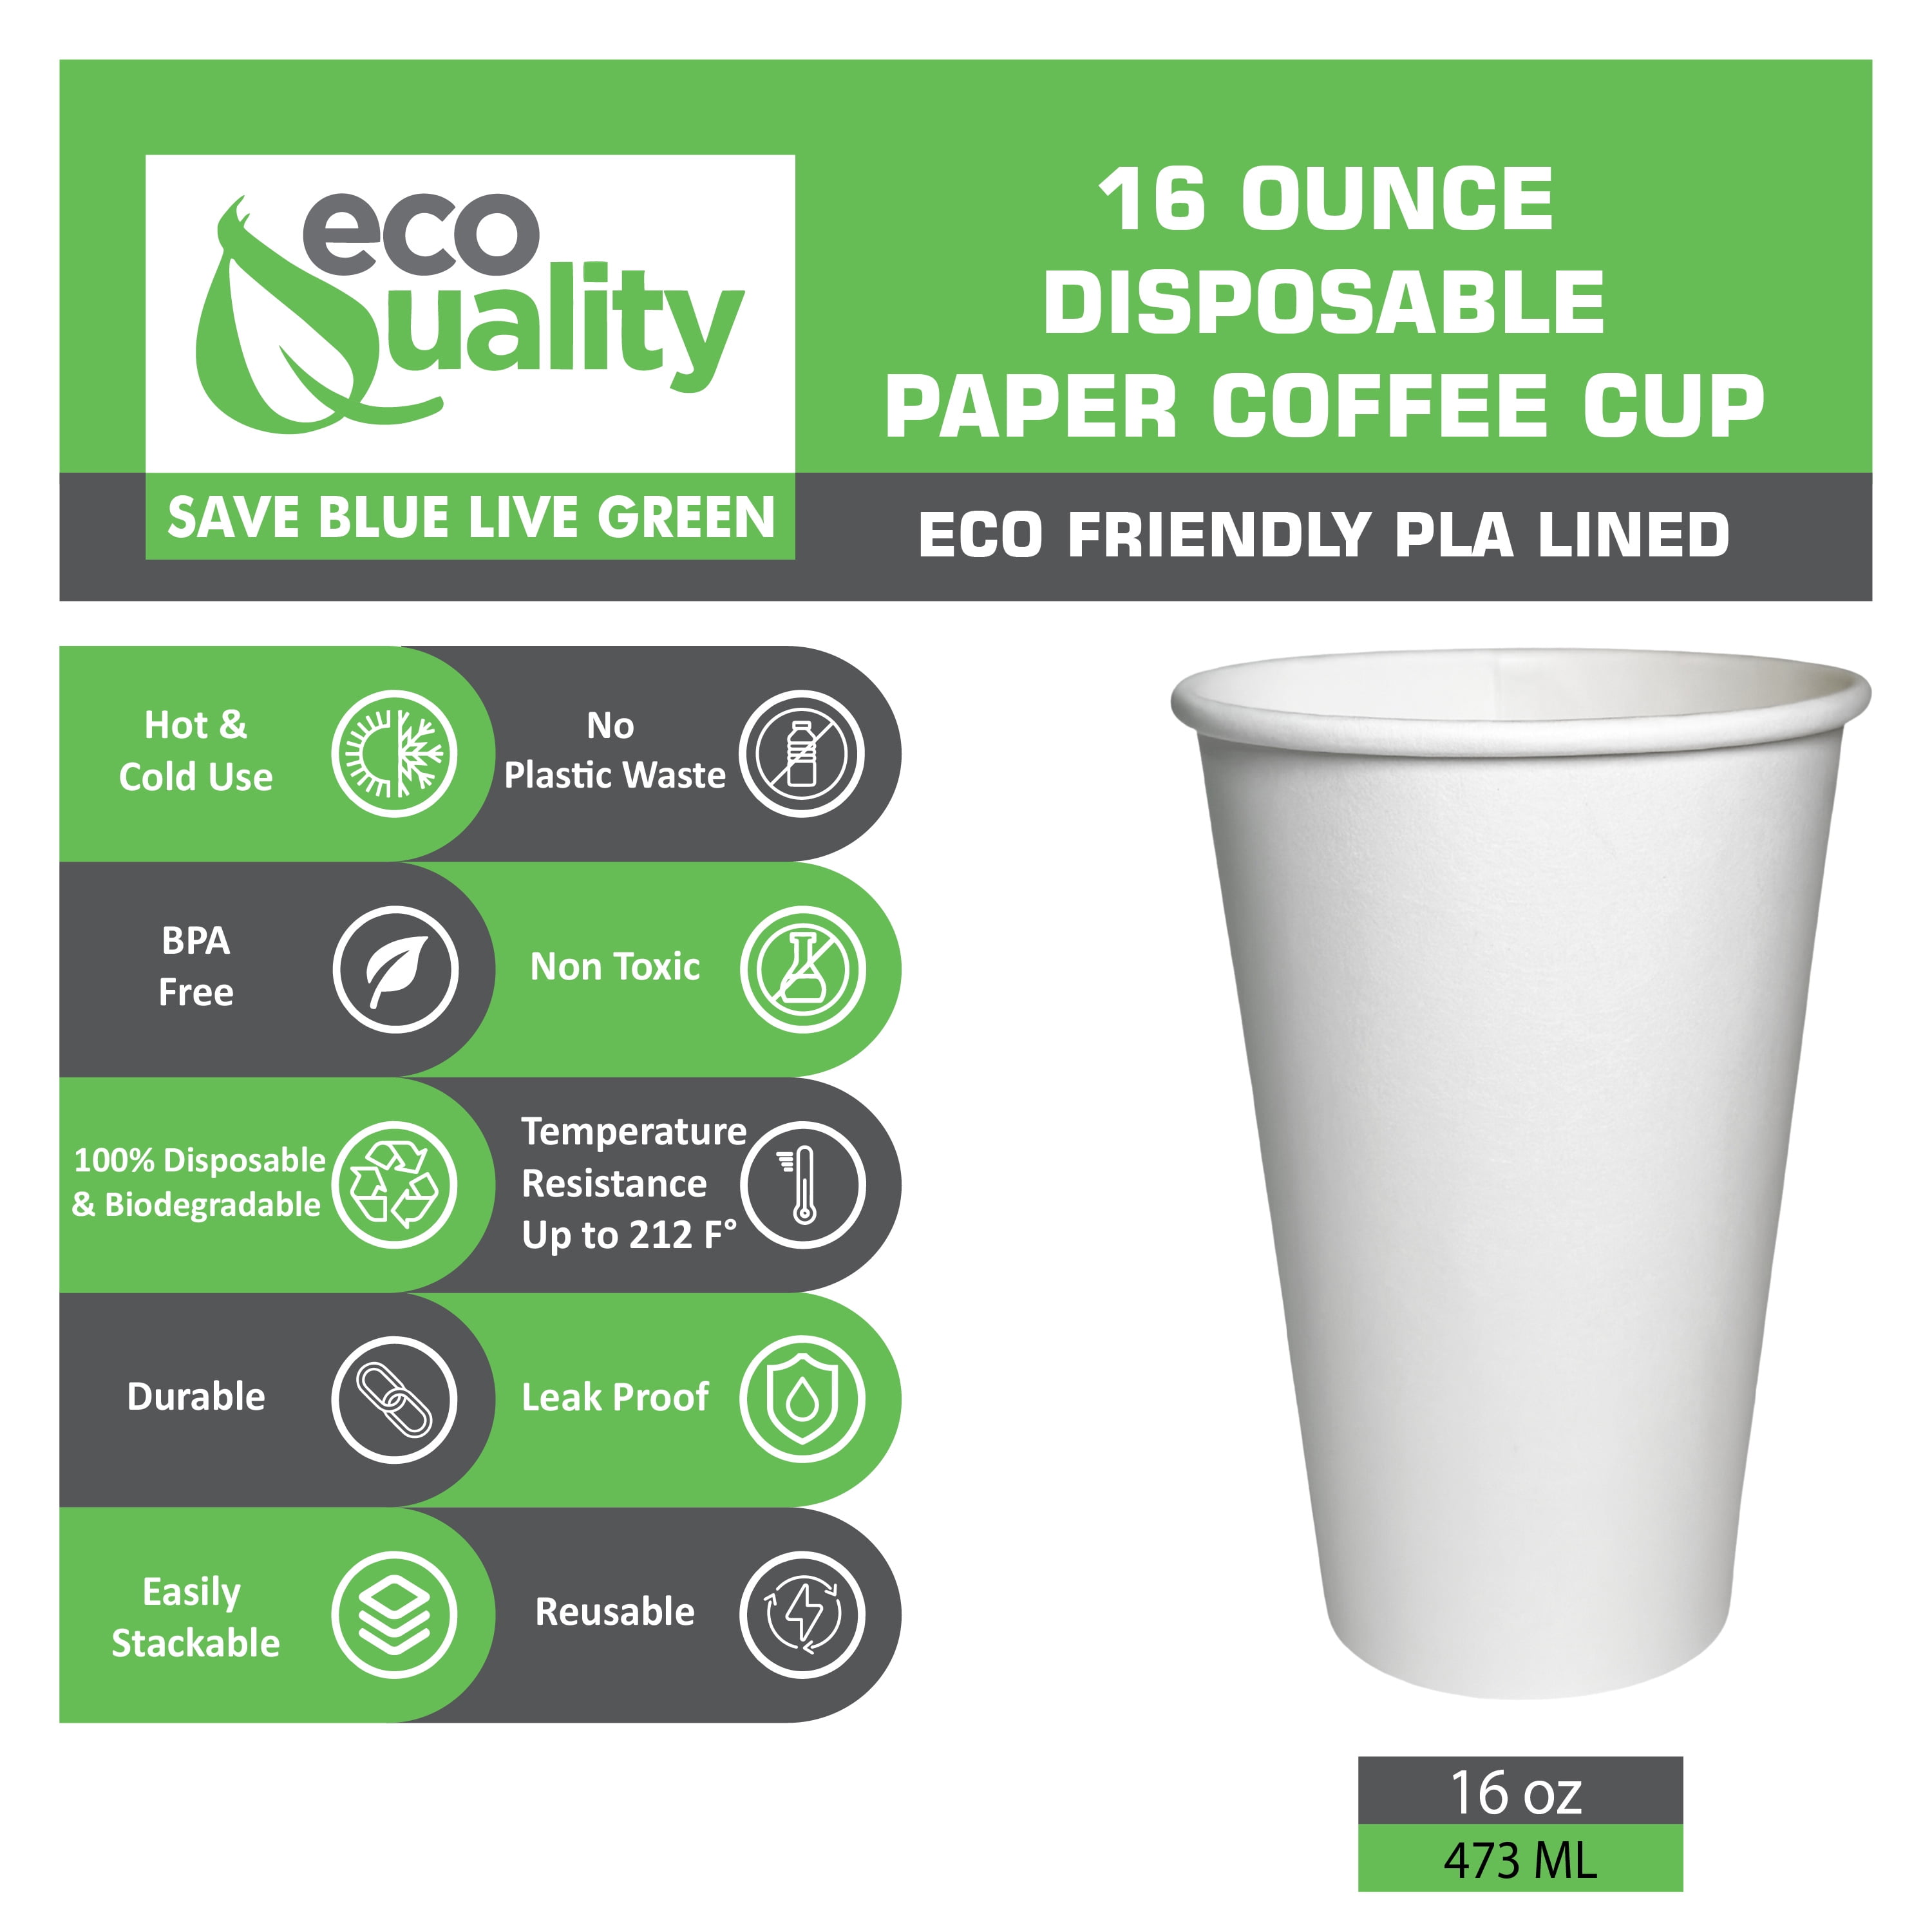 ECODESIGN-US 16 Ounce Disposable Paper Coffee Hot Cups with Black Lids - 50 Sets - Coffee Latte Macchiato to Go Large Portion